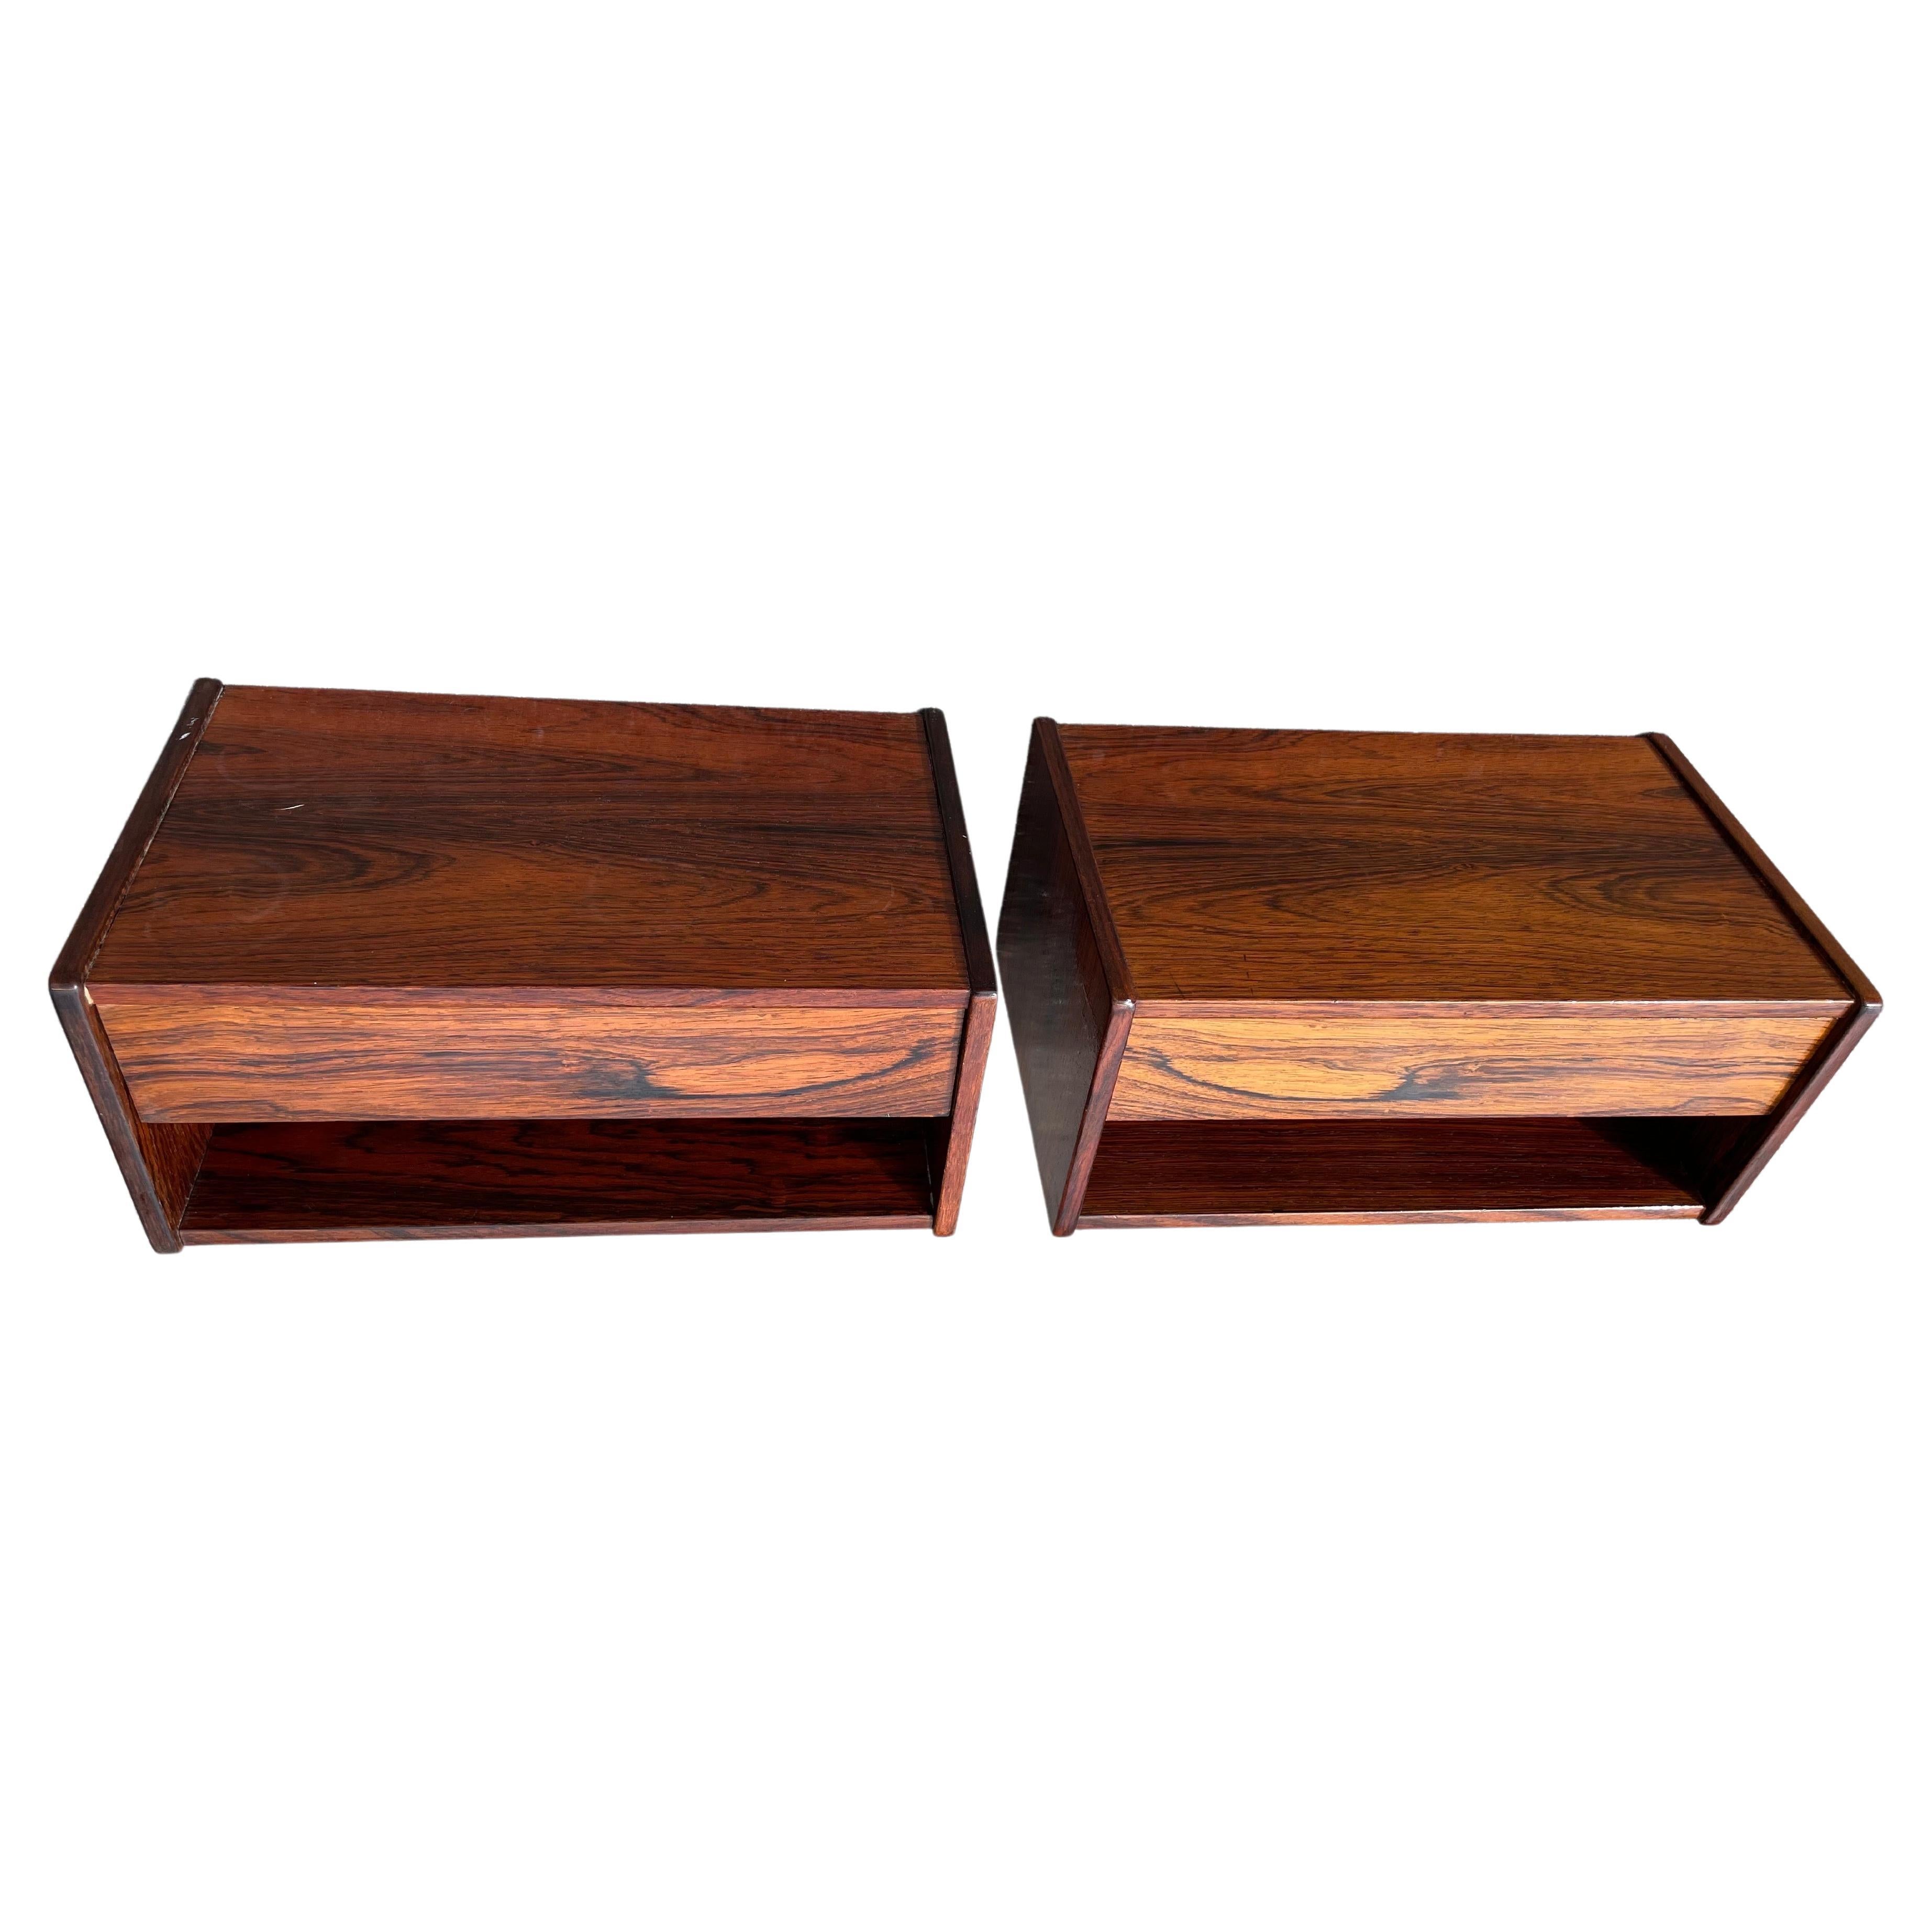 A pair of Danish designed floating bedside tables from the 1960´s